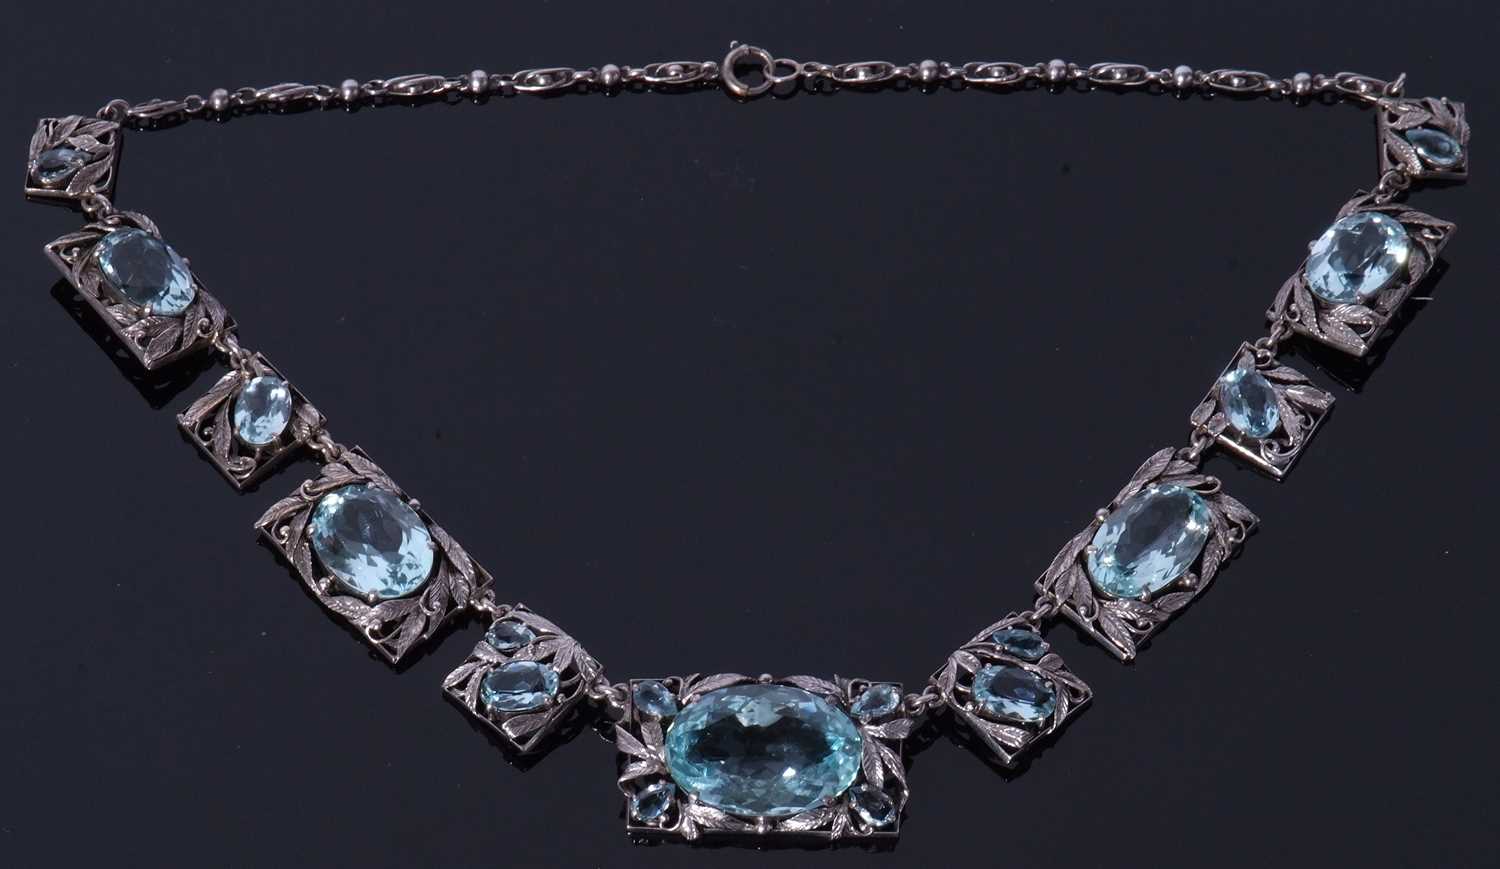 Attributed to Sybil Dunlop, Arts & Crafts demi-parure to include necklace, an alternate - Image 20 of 29